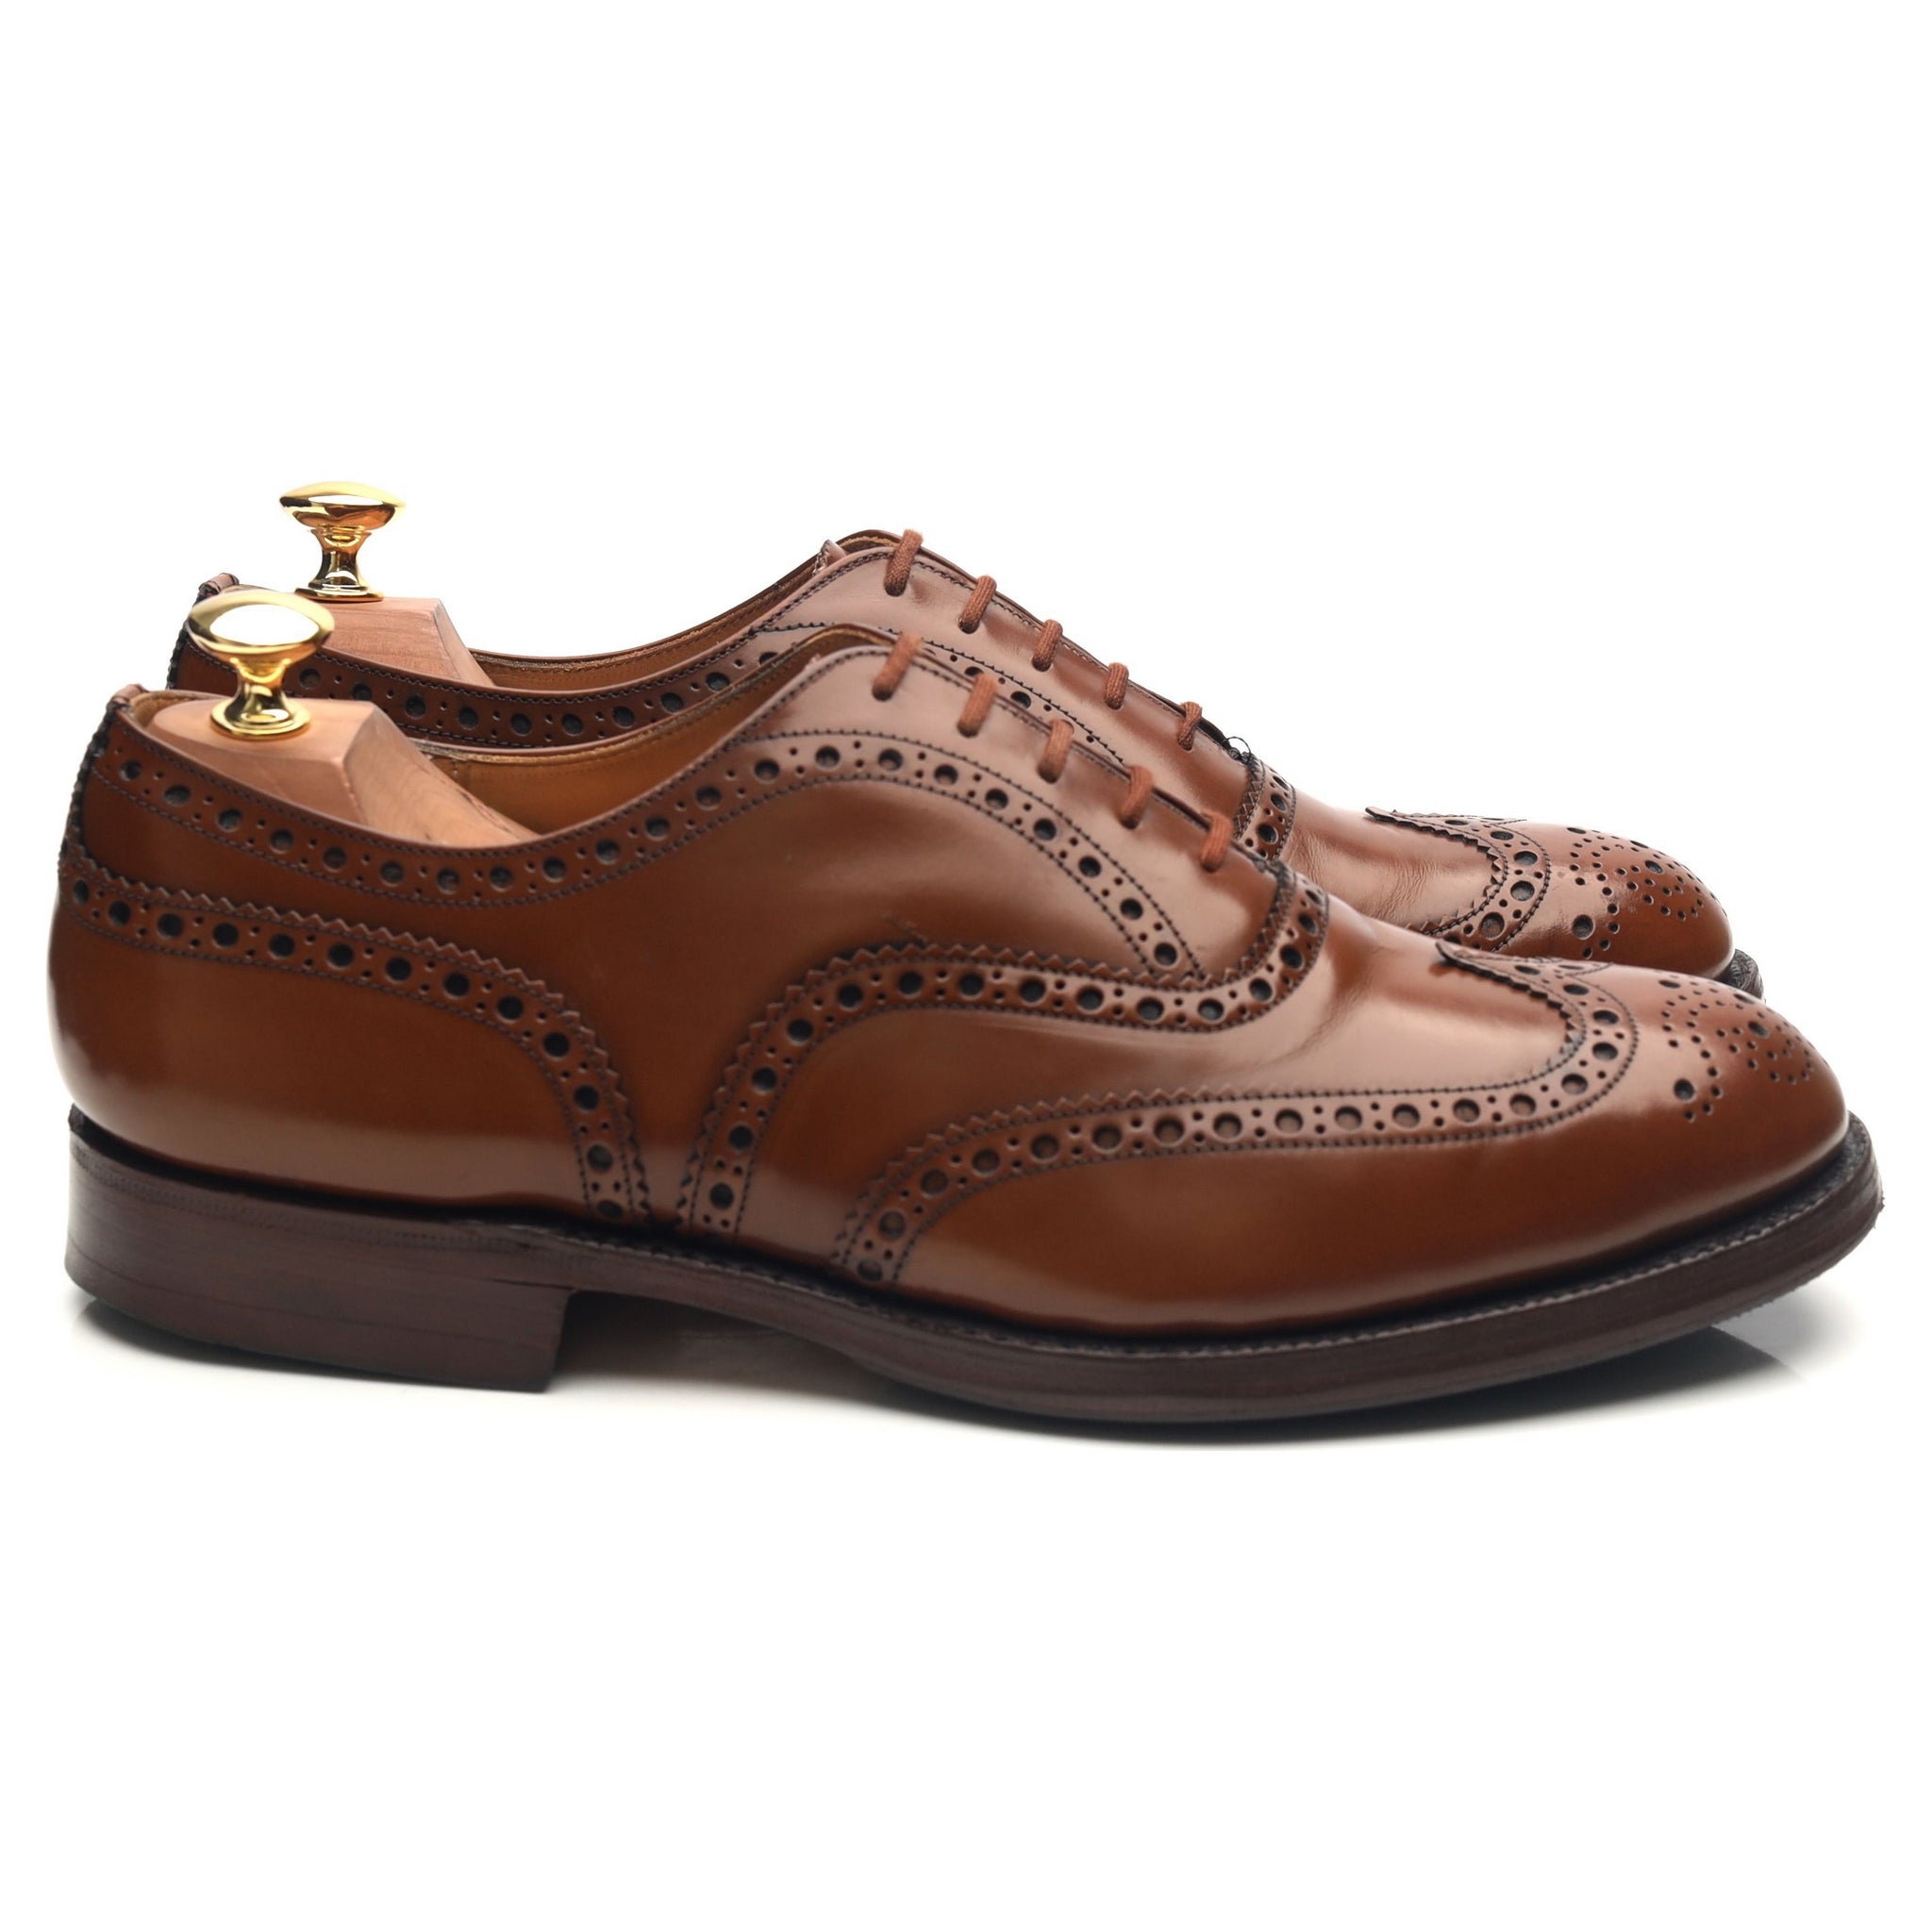 'Burwood' Brown Leather Brogues UK 9 G - Abbot's Shoes